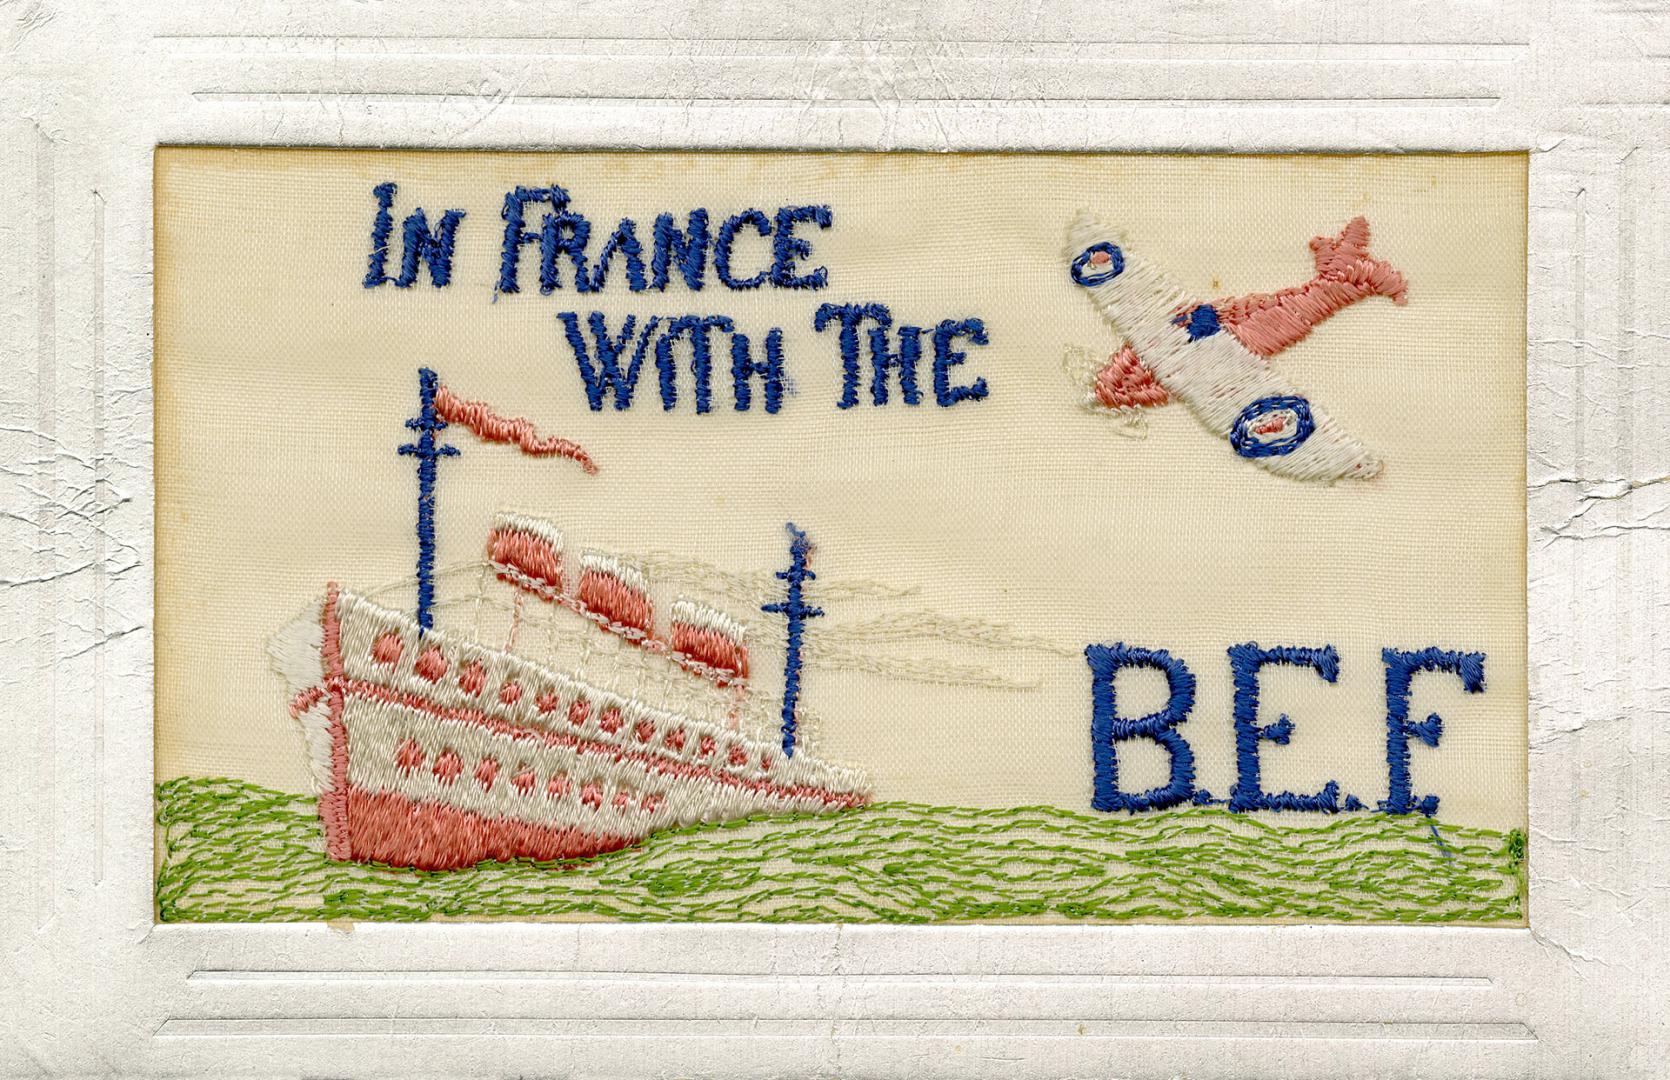 Silk embroidery of a ship and a military air plane, both pink and grey. "In France with the B.E ...